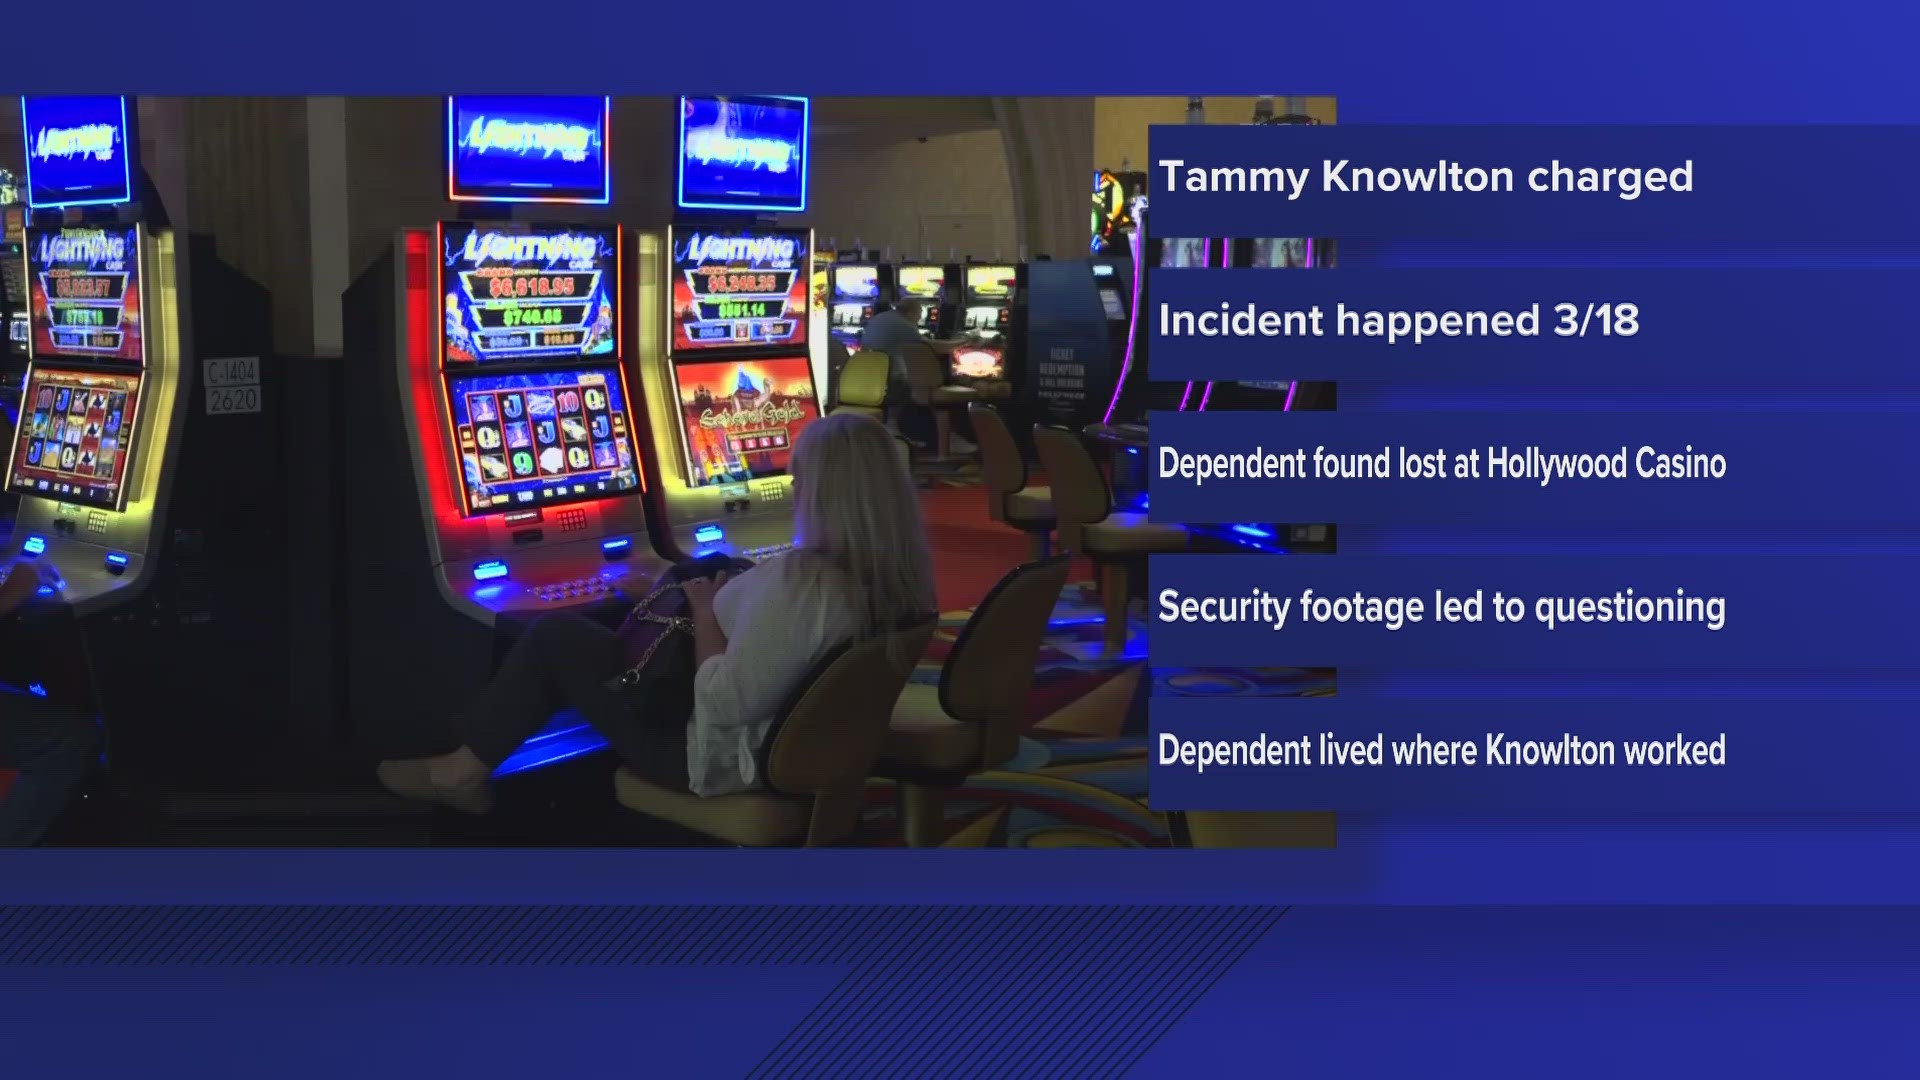 The woman who became lost at the casino was a resident at the residential care home where the caretaker worked, according to police.